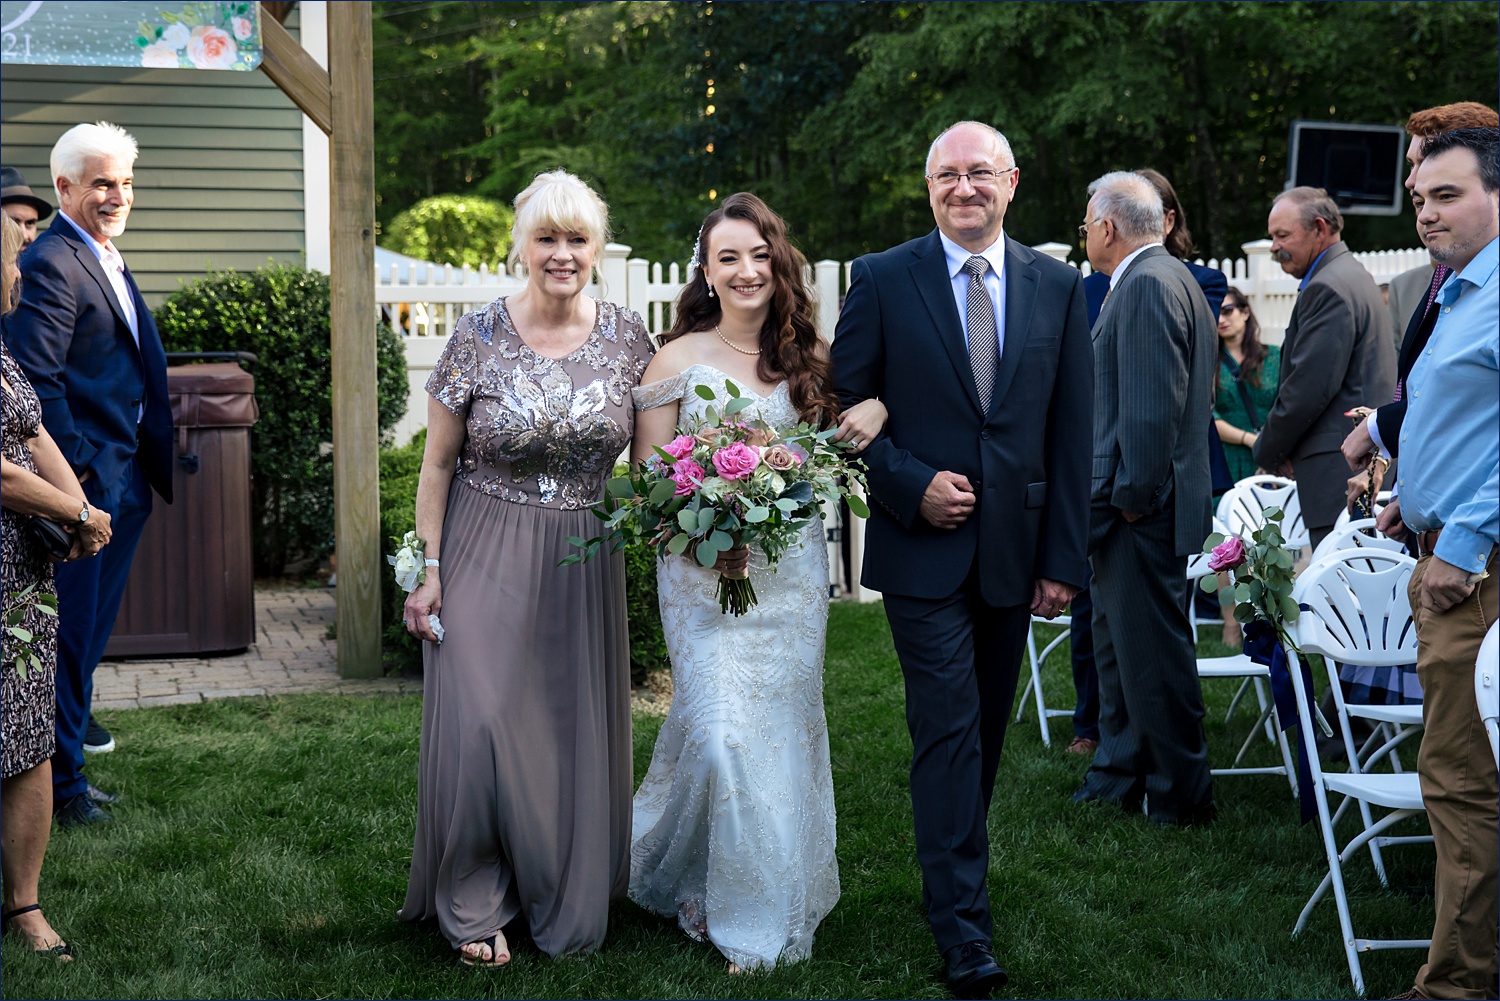 The bride comes down the aisle with her parents